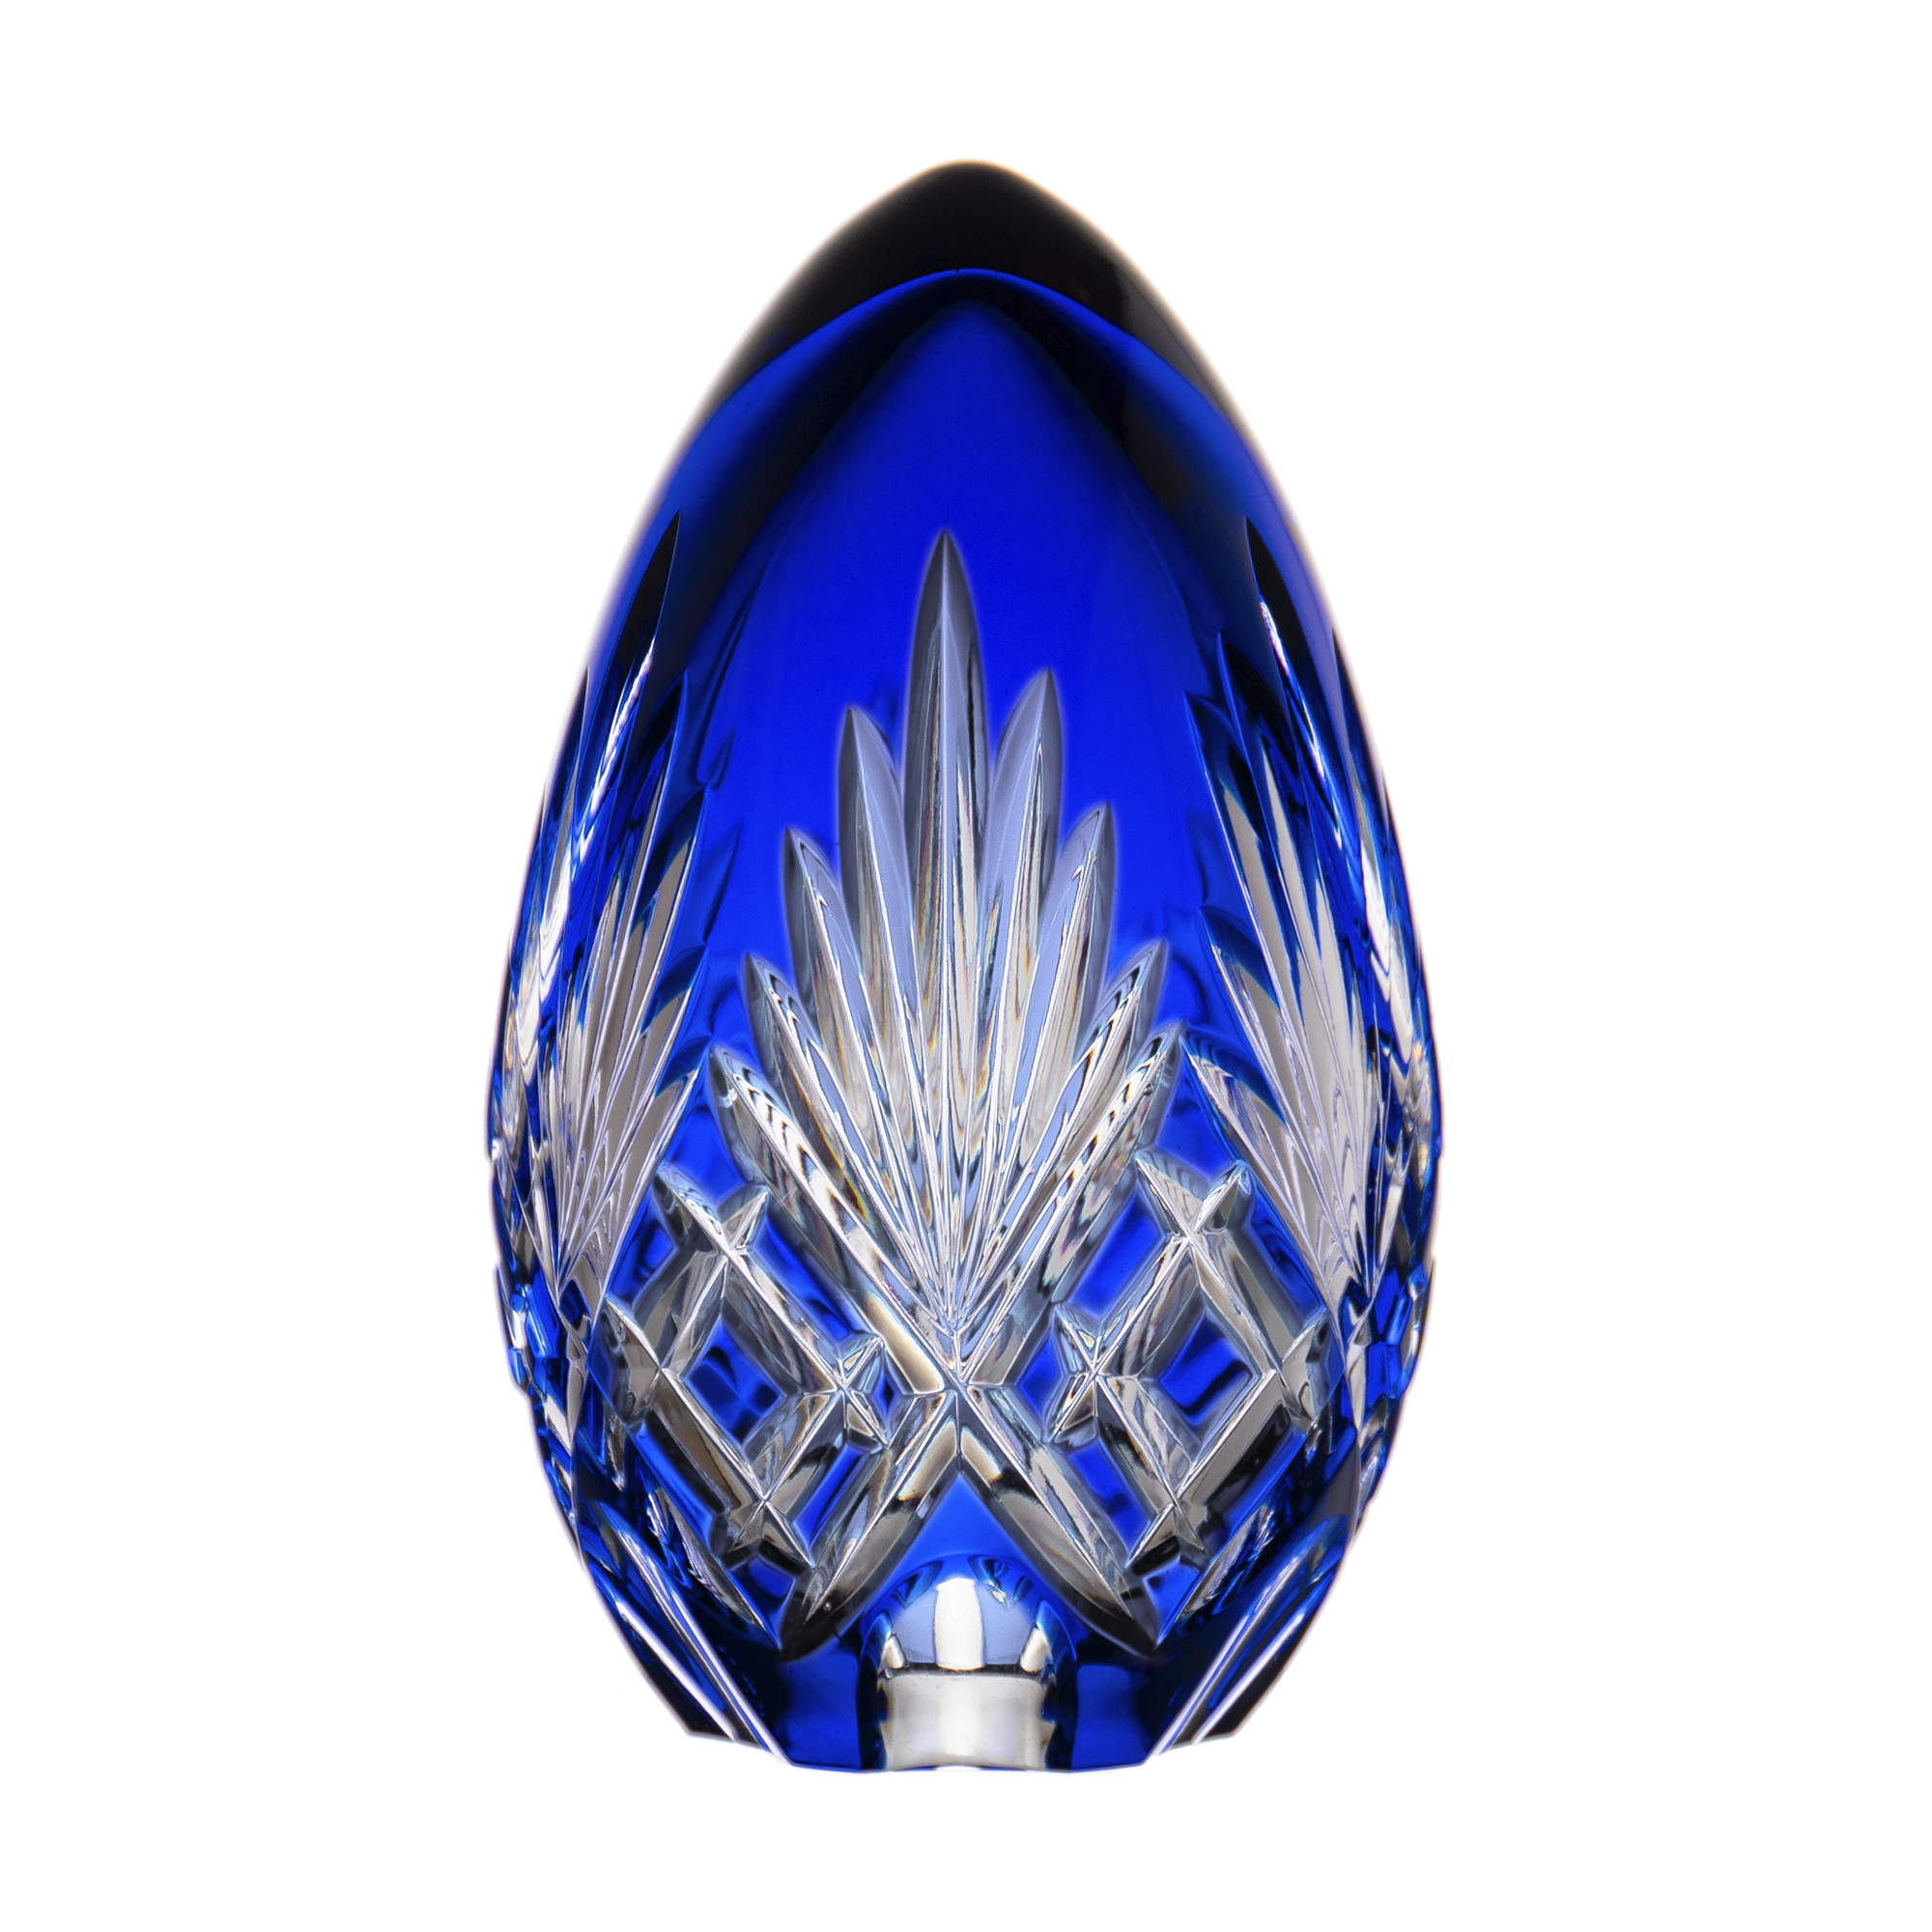 Fabergé Odessa Blue Egg Paperweight 4.7 in